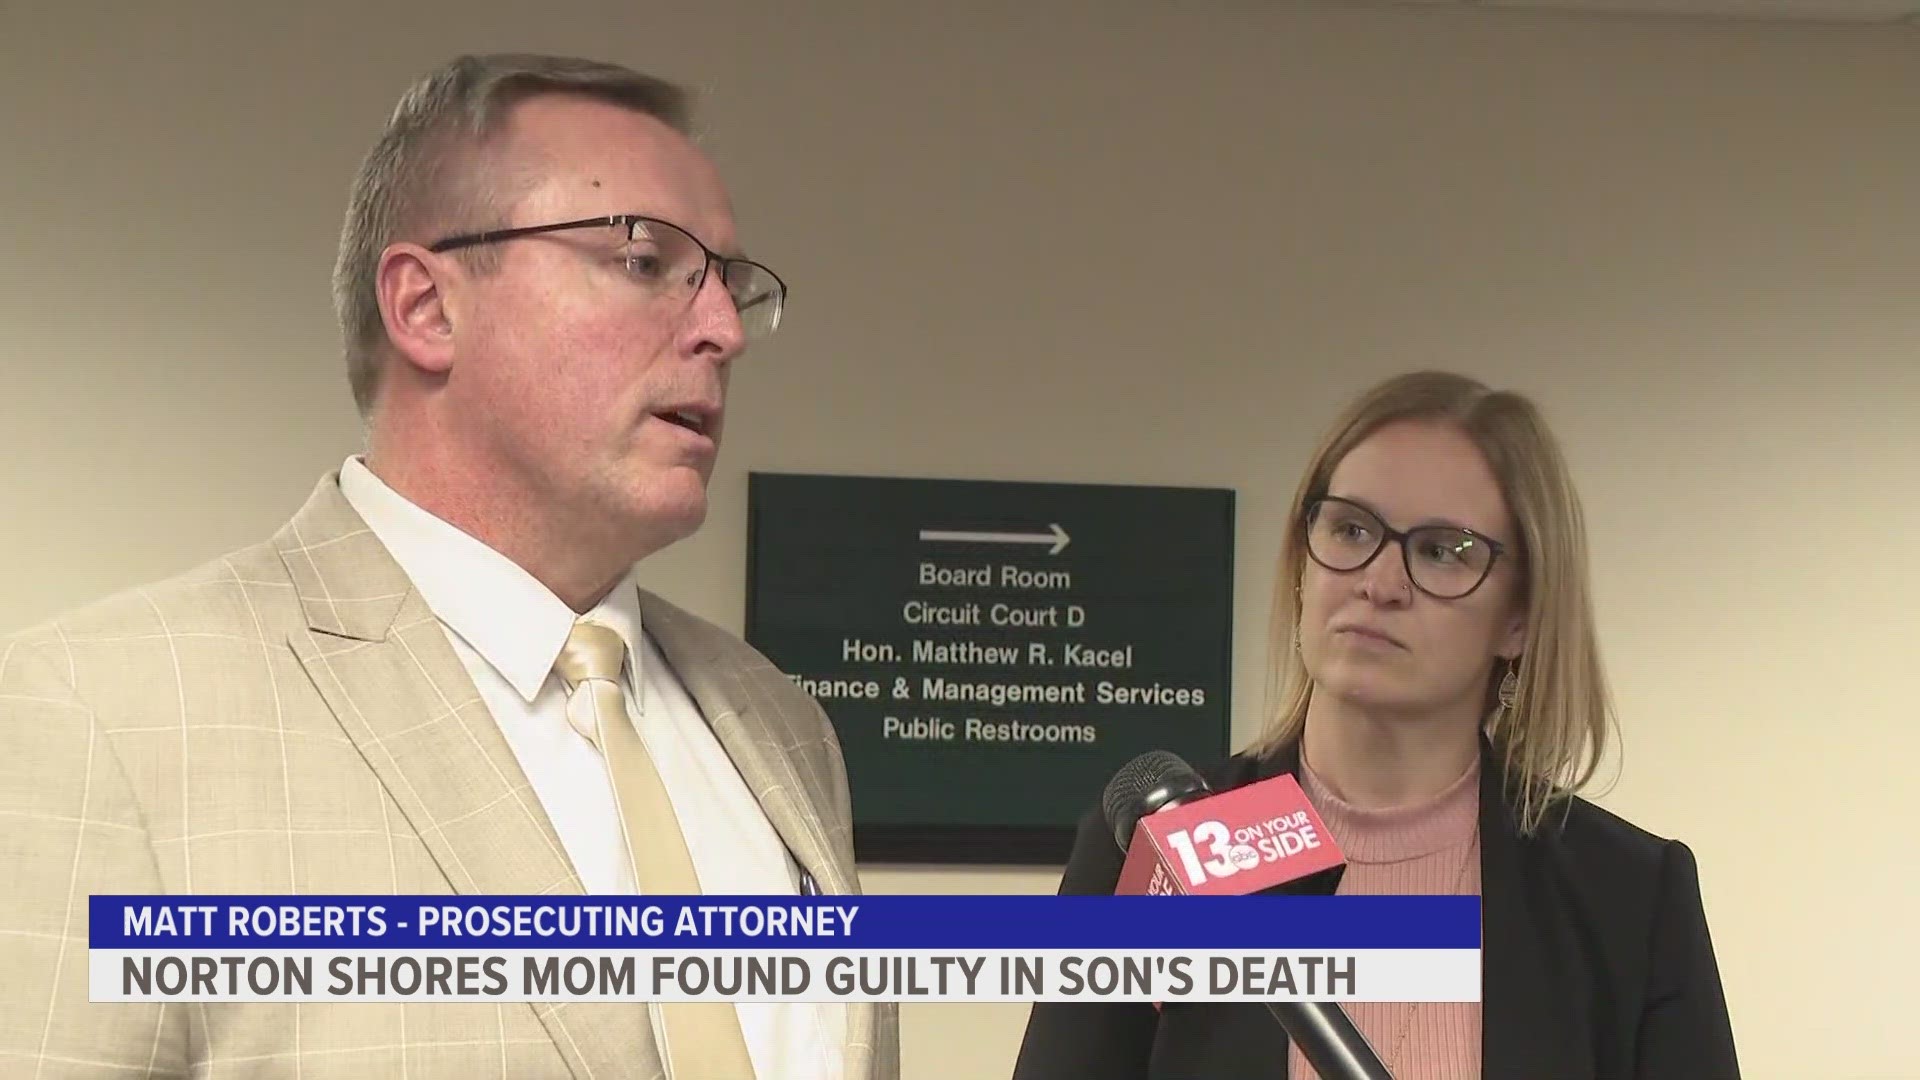 Even though she wasn't in the courtroom for the verdict, Vander Ark was found guilty of both murder and child abuse in the death of her 15-year-old son.